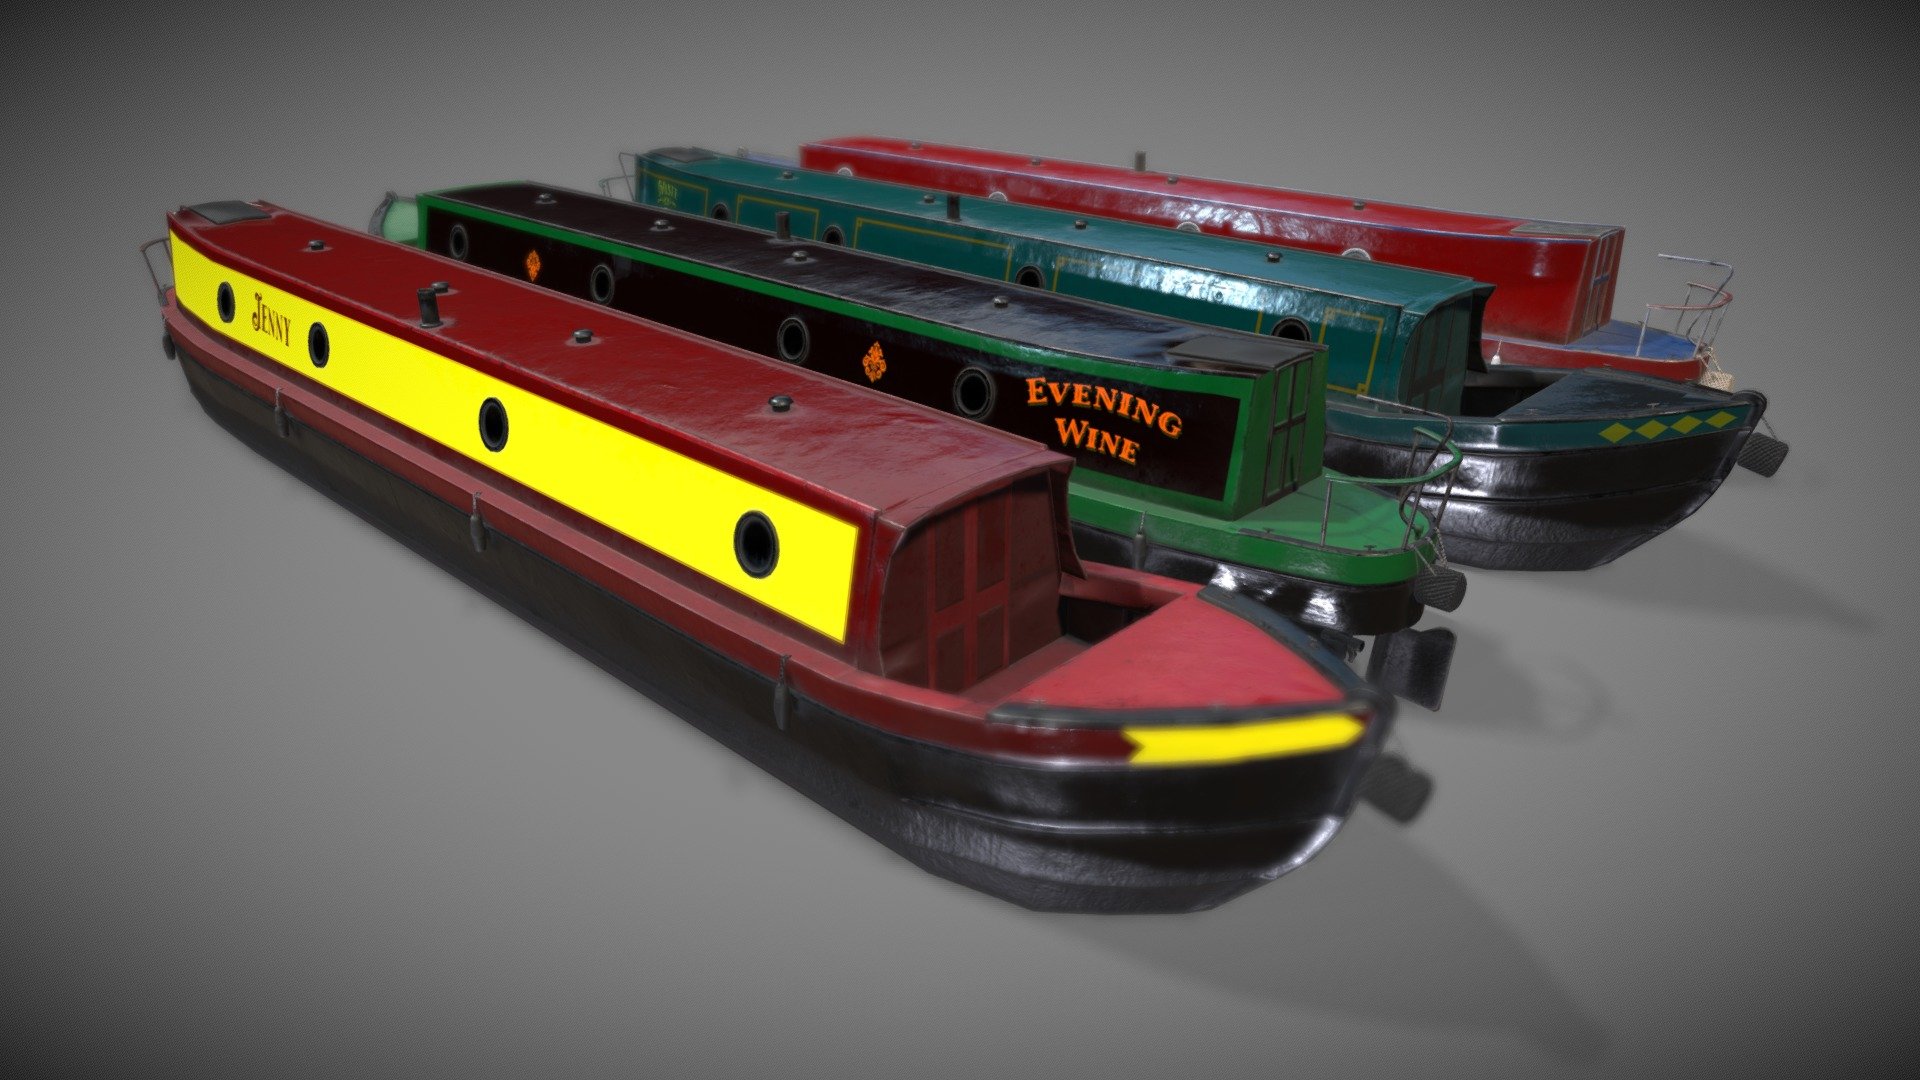 Narrowboat low poly

2976 Polys 3389 verts

Textures are 4096x4096

Also included is the .psd for ease of editing colours and decals 3d model